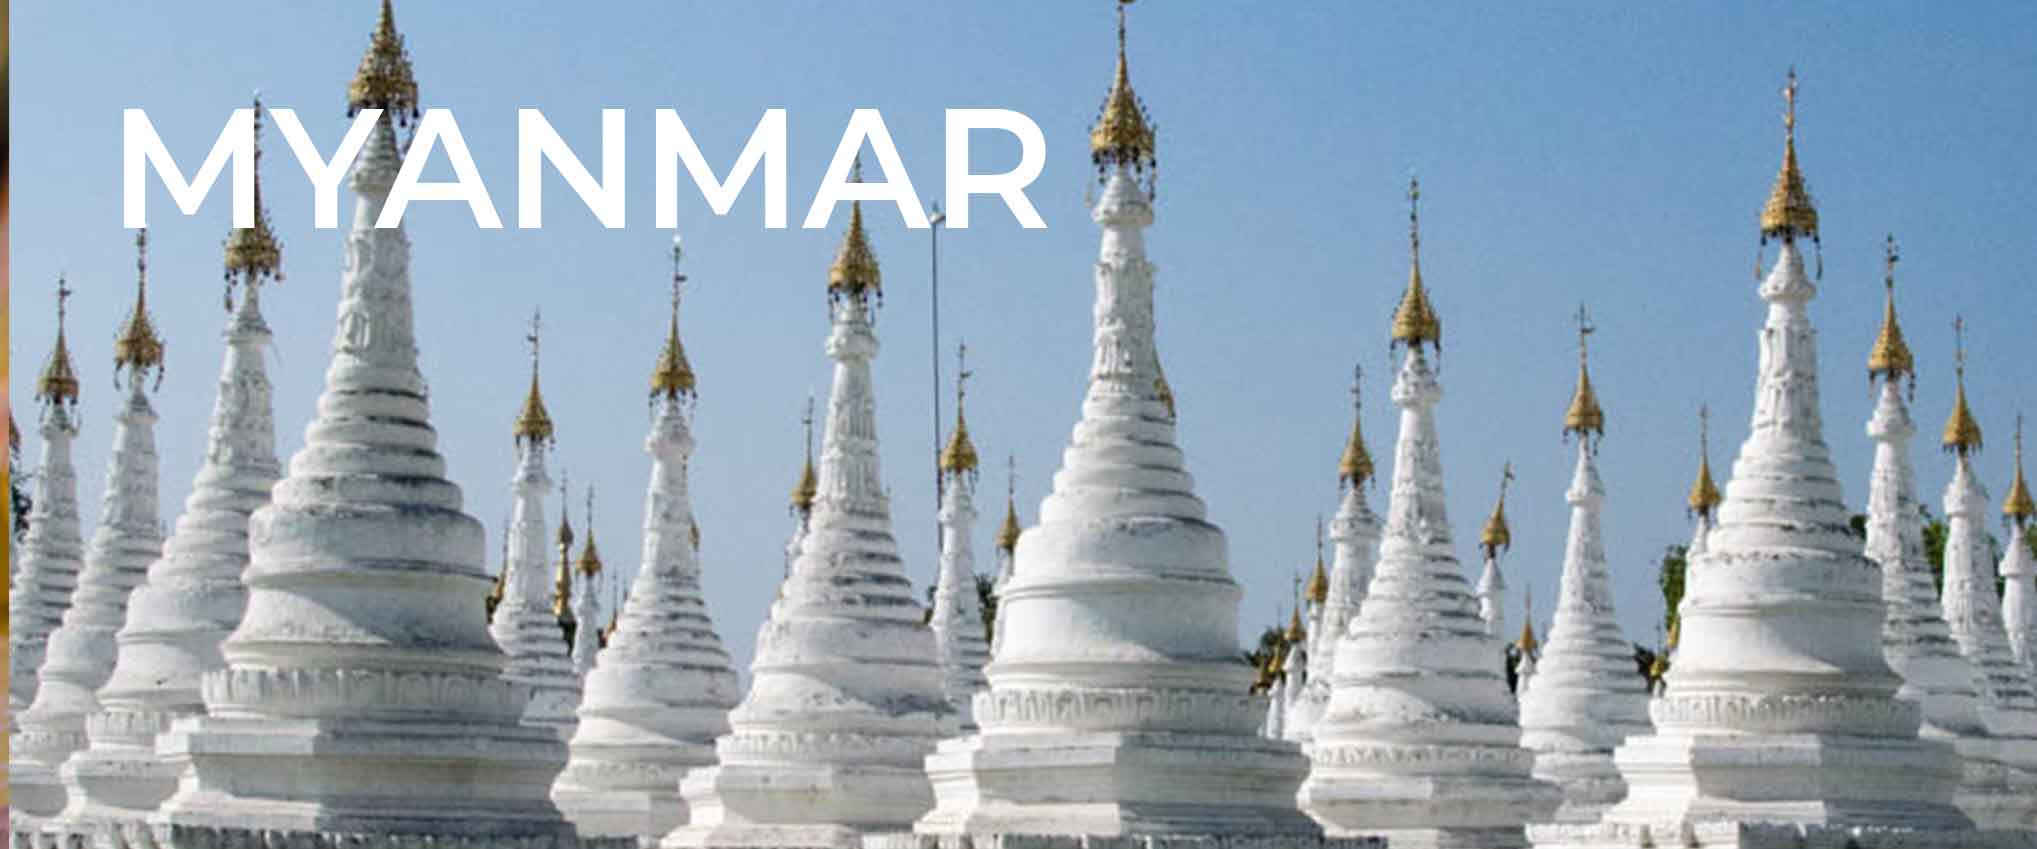 Myanmar-page-banner